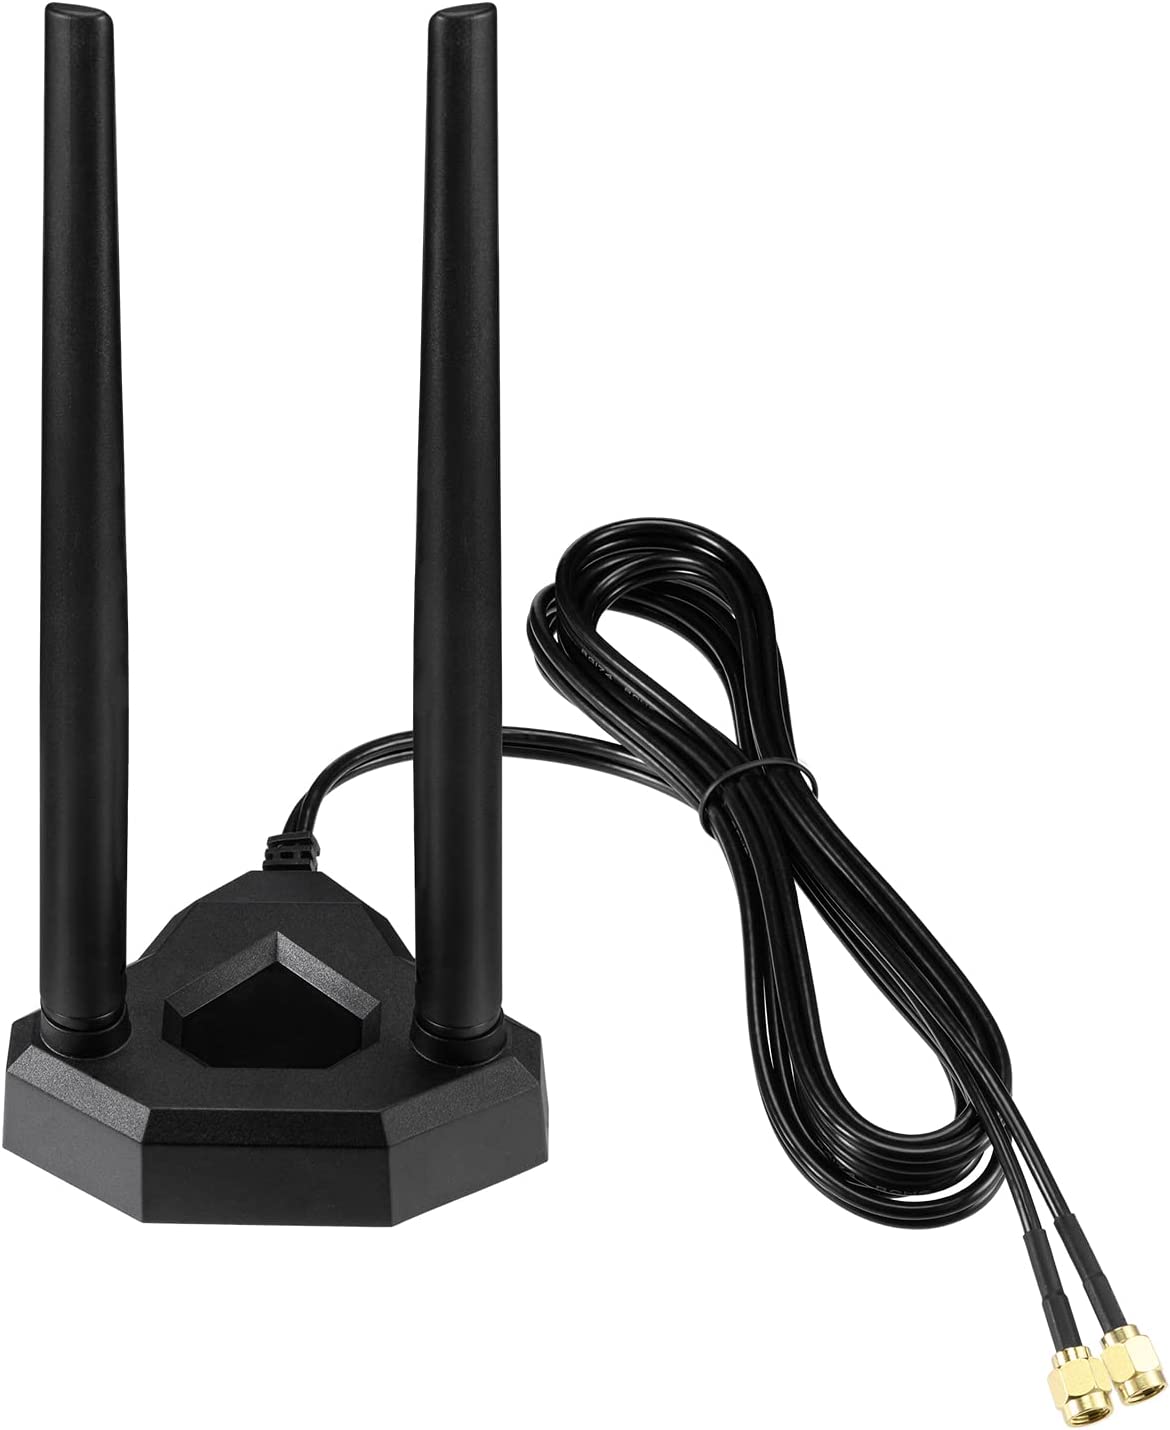 Eightwood Dual Band WiFi Antenna 2.4GHz 5GHz RP-SMA [...]